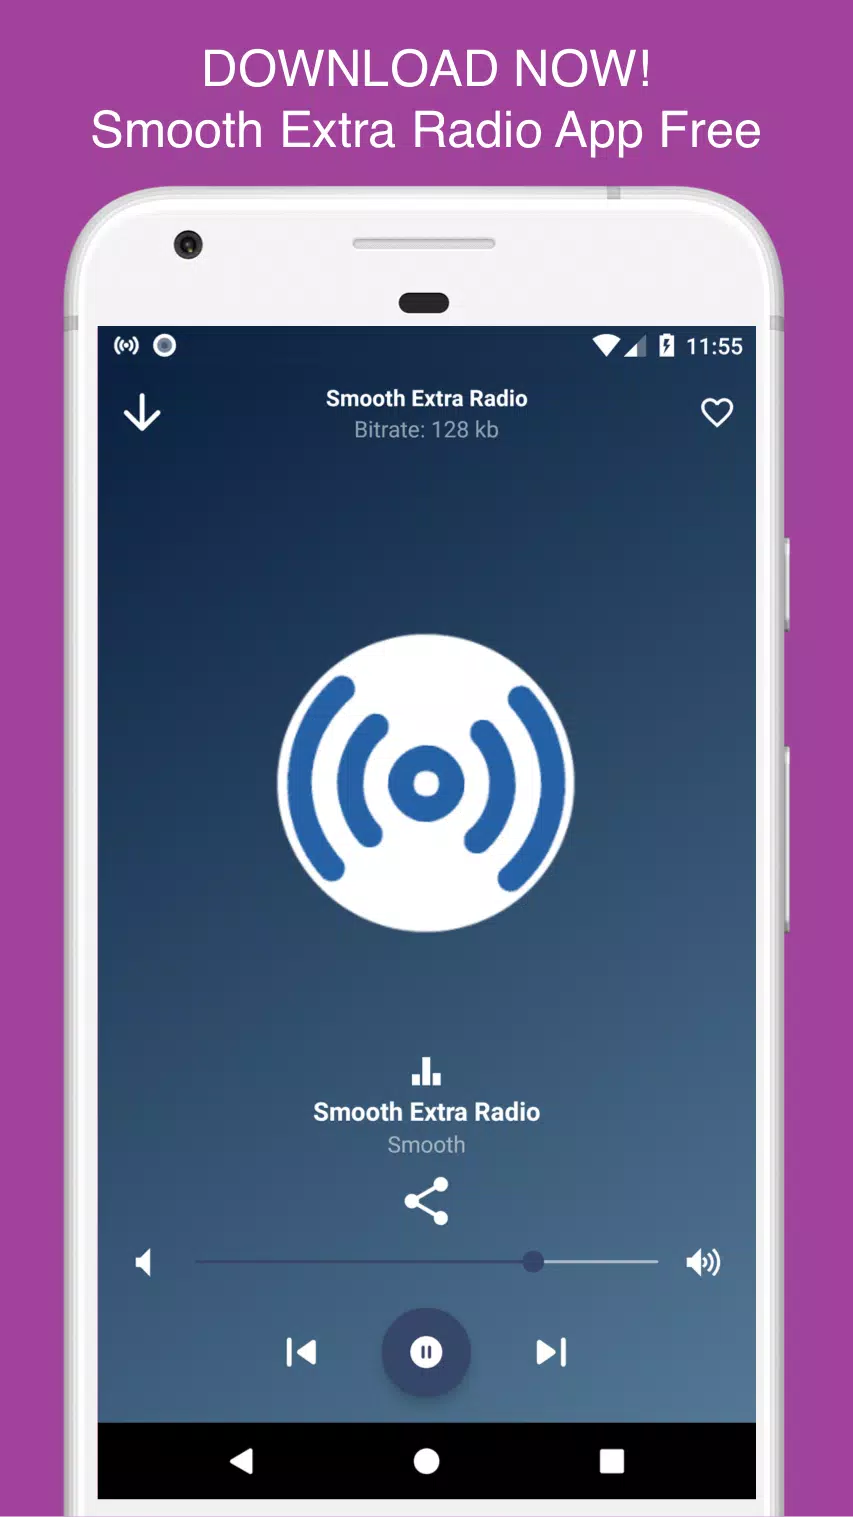 Smooth Extra Radio App Free Music Soul London UK for Android - APK Download